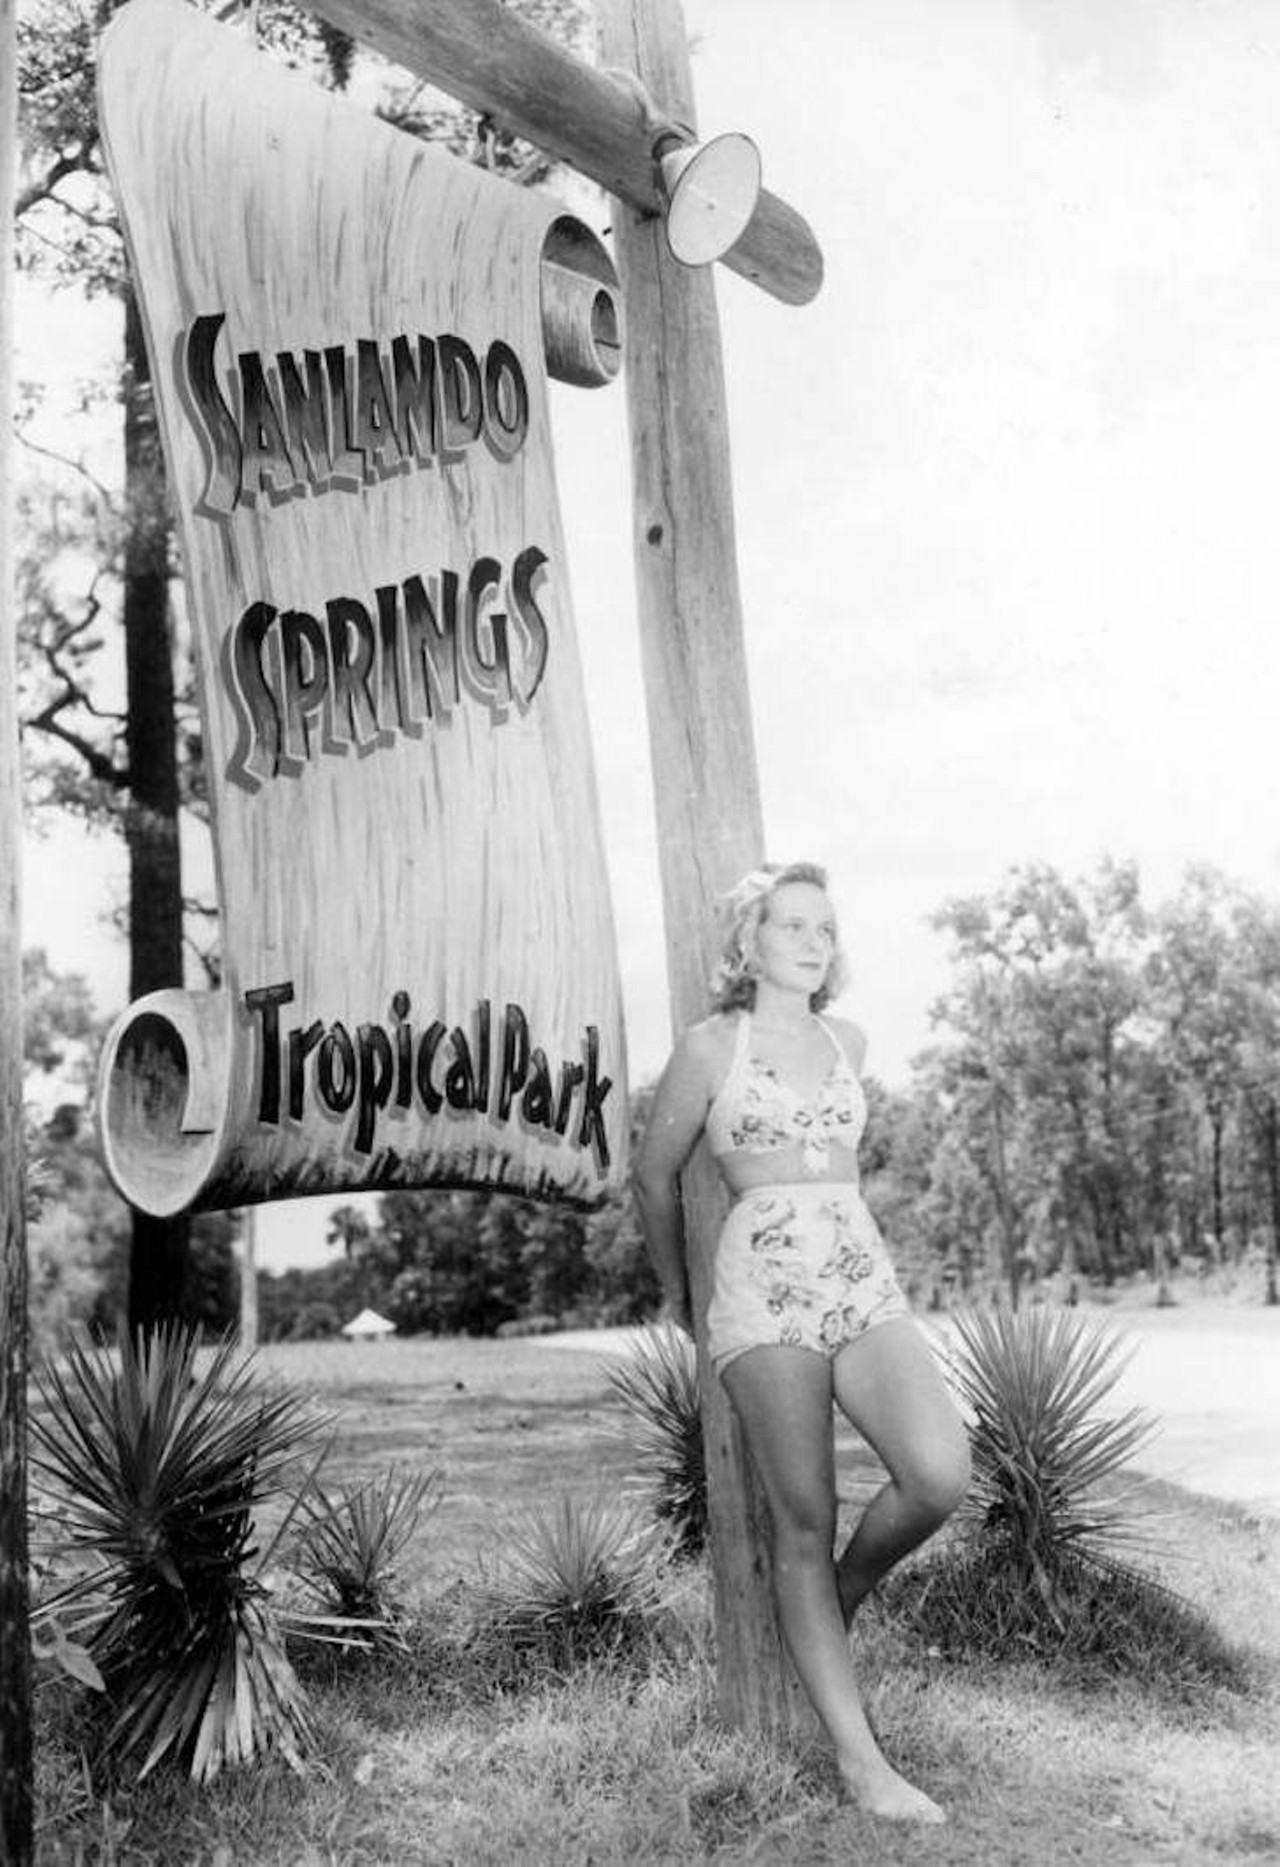 Jean Baker standing next to the Sanlando Springs' sign, 1946.